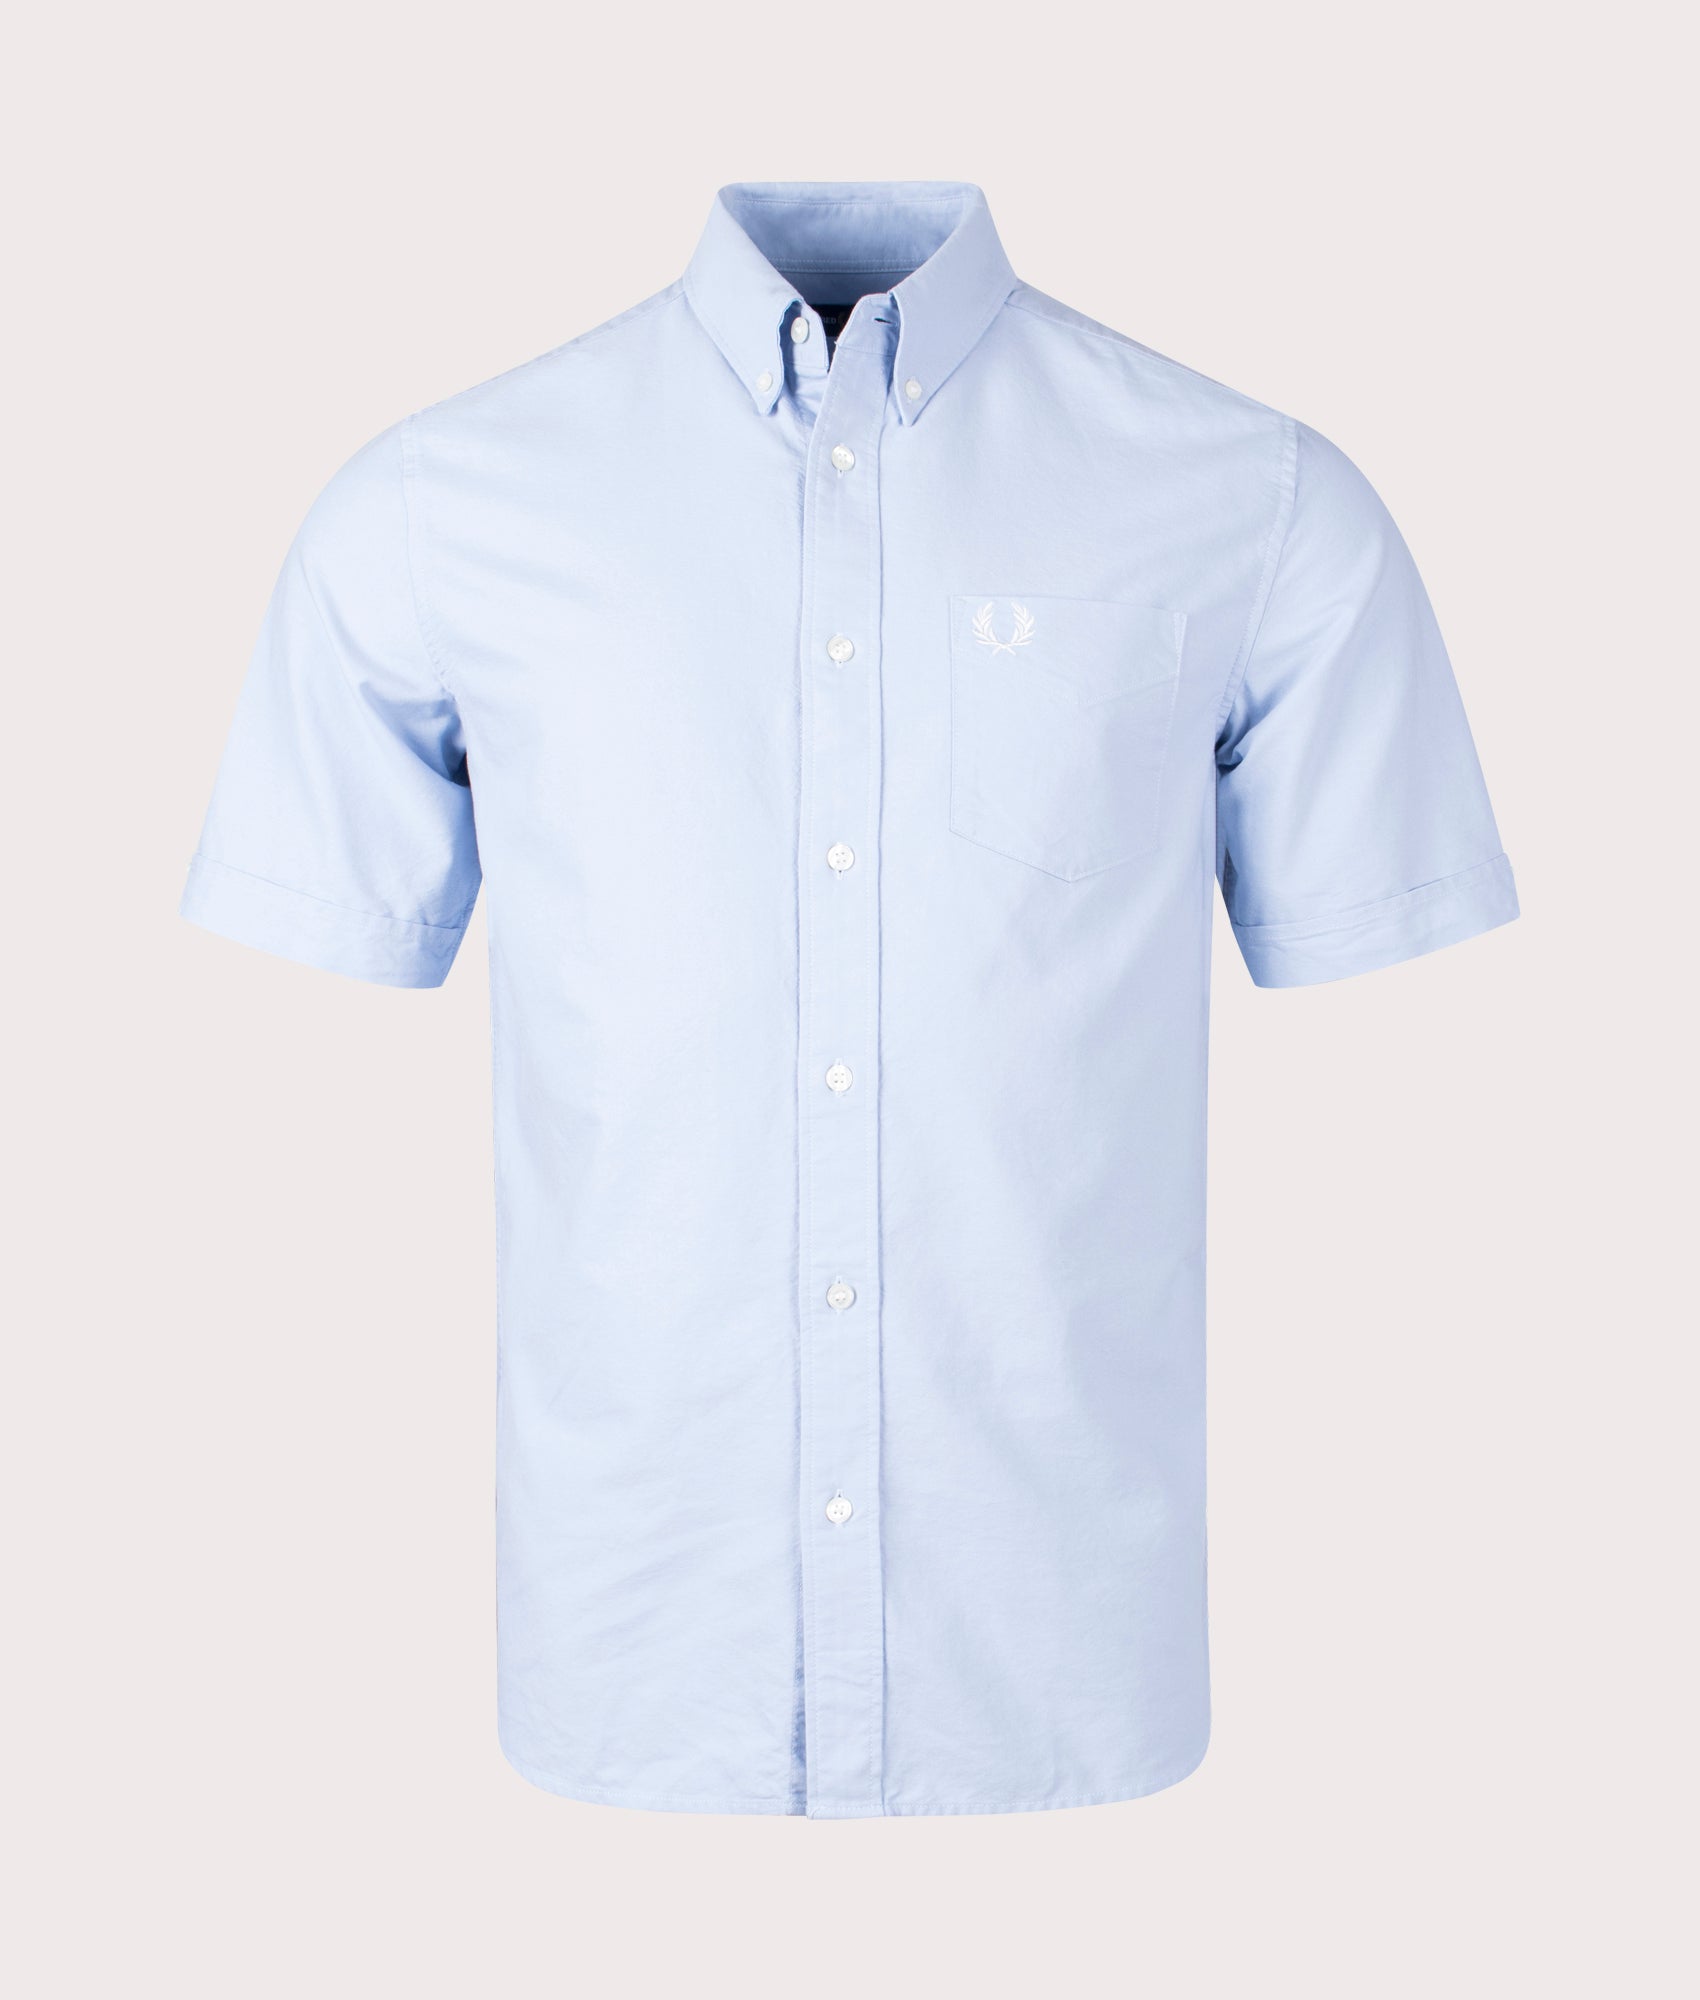 Fred Perry Mens Short Sleeve Oxford Shirt - Colour: 146 Light Smoke - Size: XXL